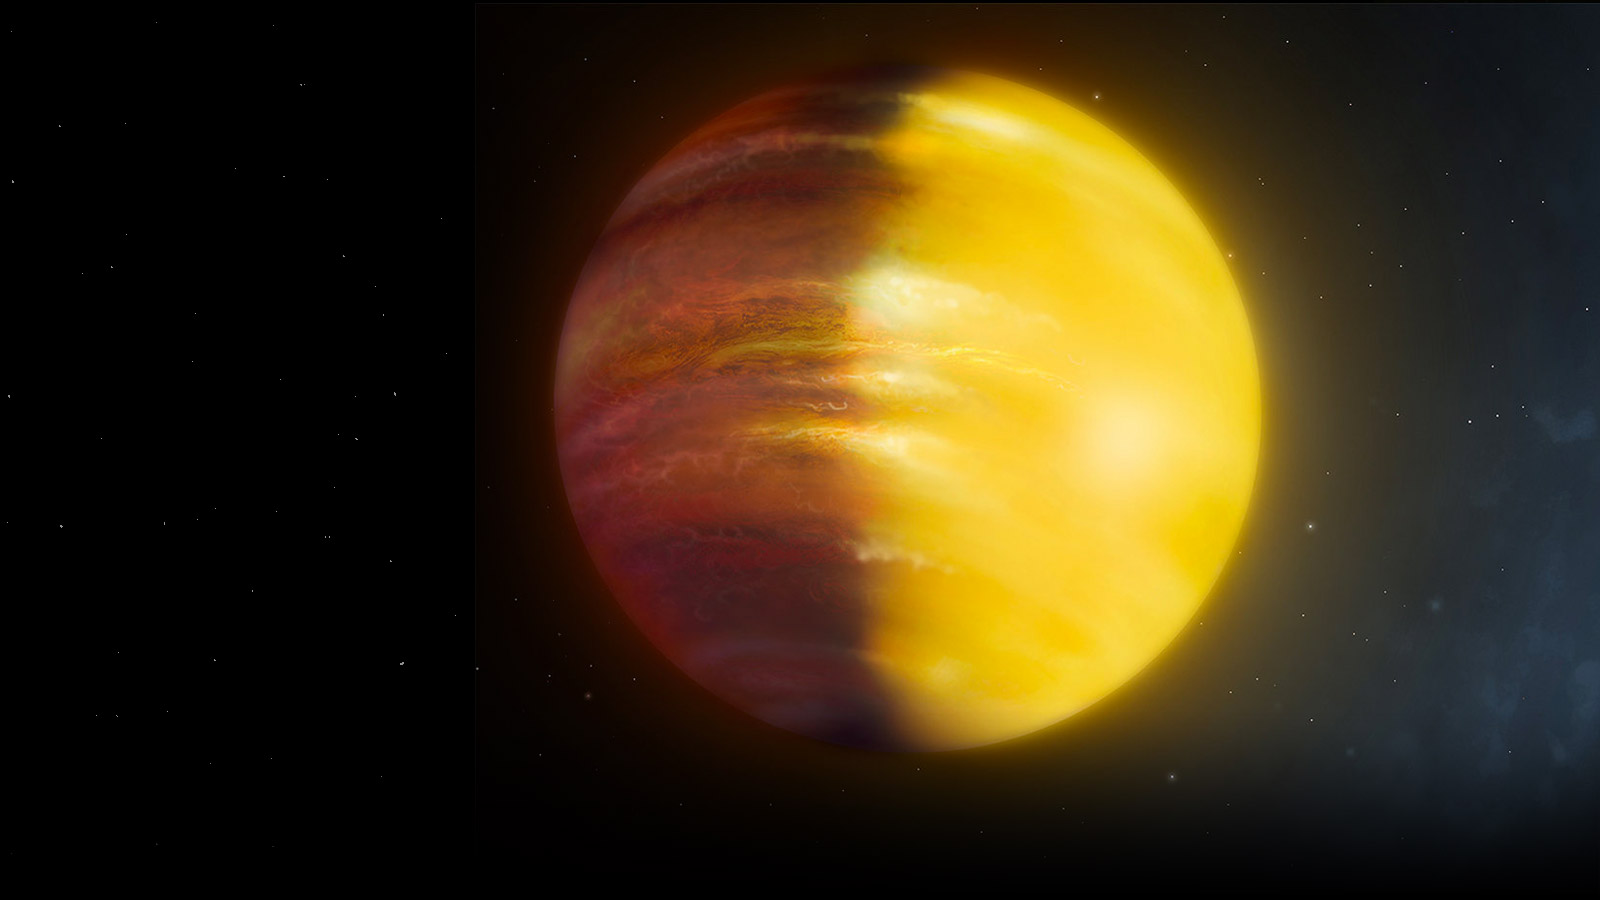 gas giant planet with life